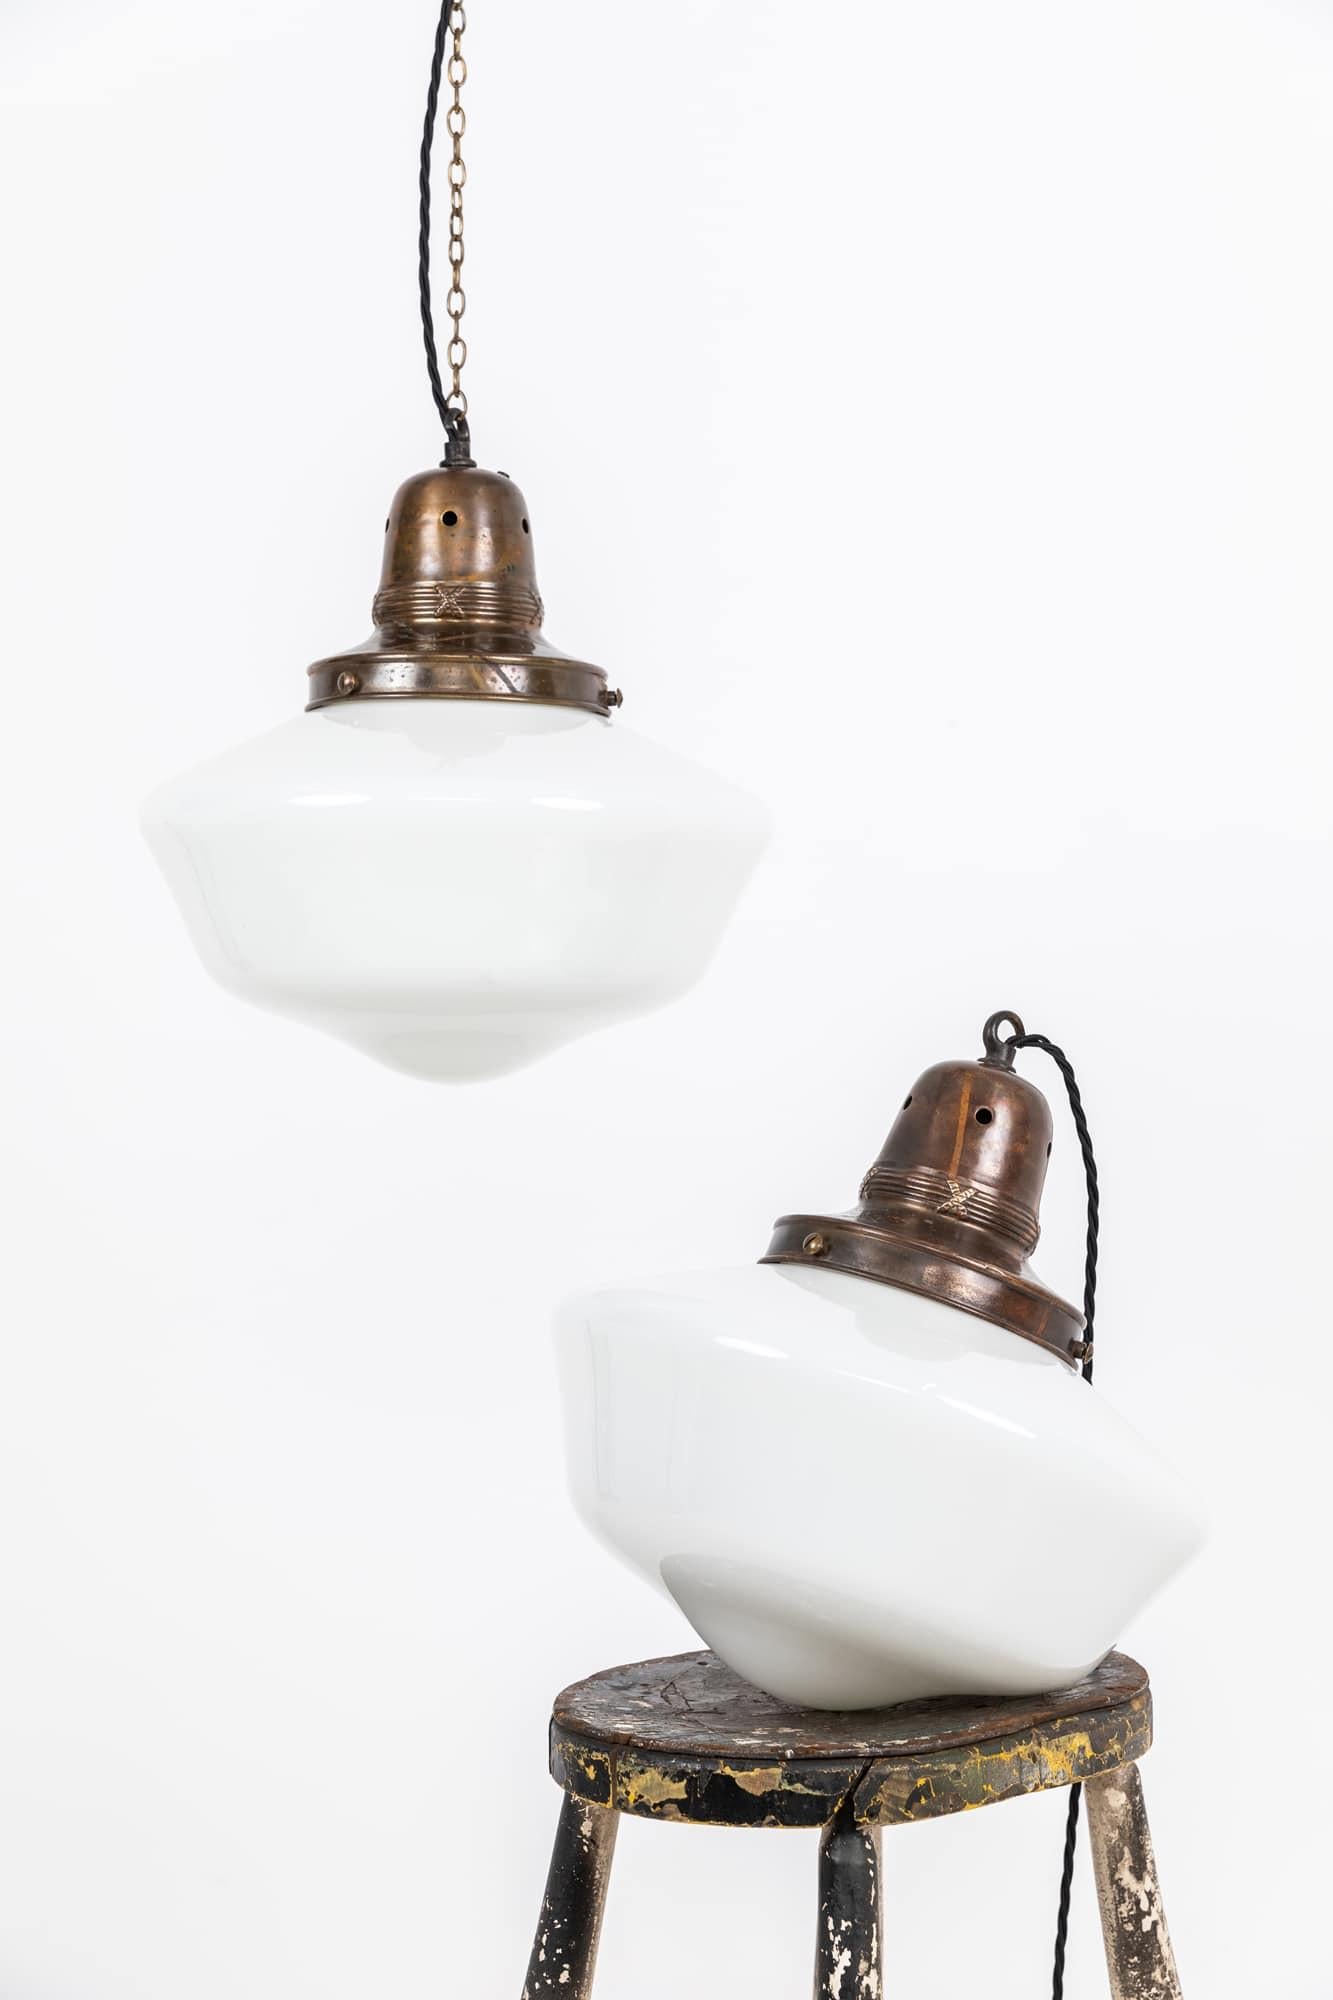 Pair of beautifully formed large opaline glass pendant lights. c.1930

Heavy gauge moulded opaline glass shades, this shape of lamp were commonplace in churches and chapels up and down the country in the early 20th century. Complete with brass